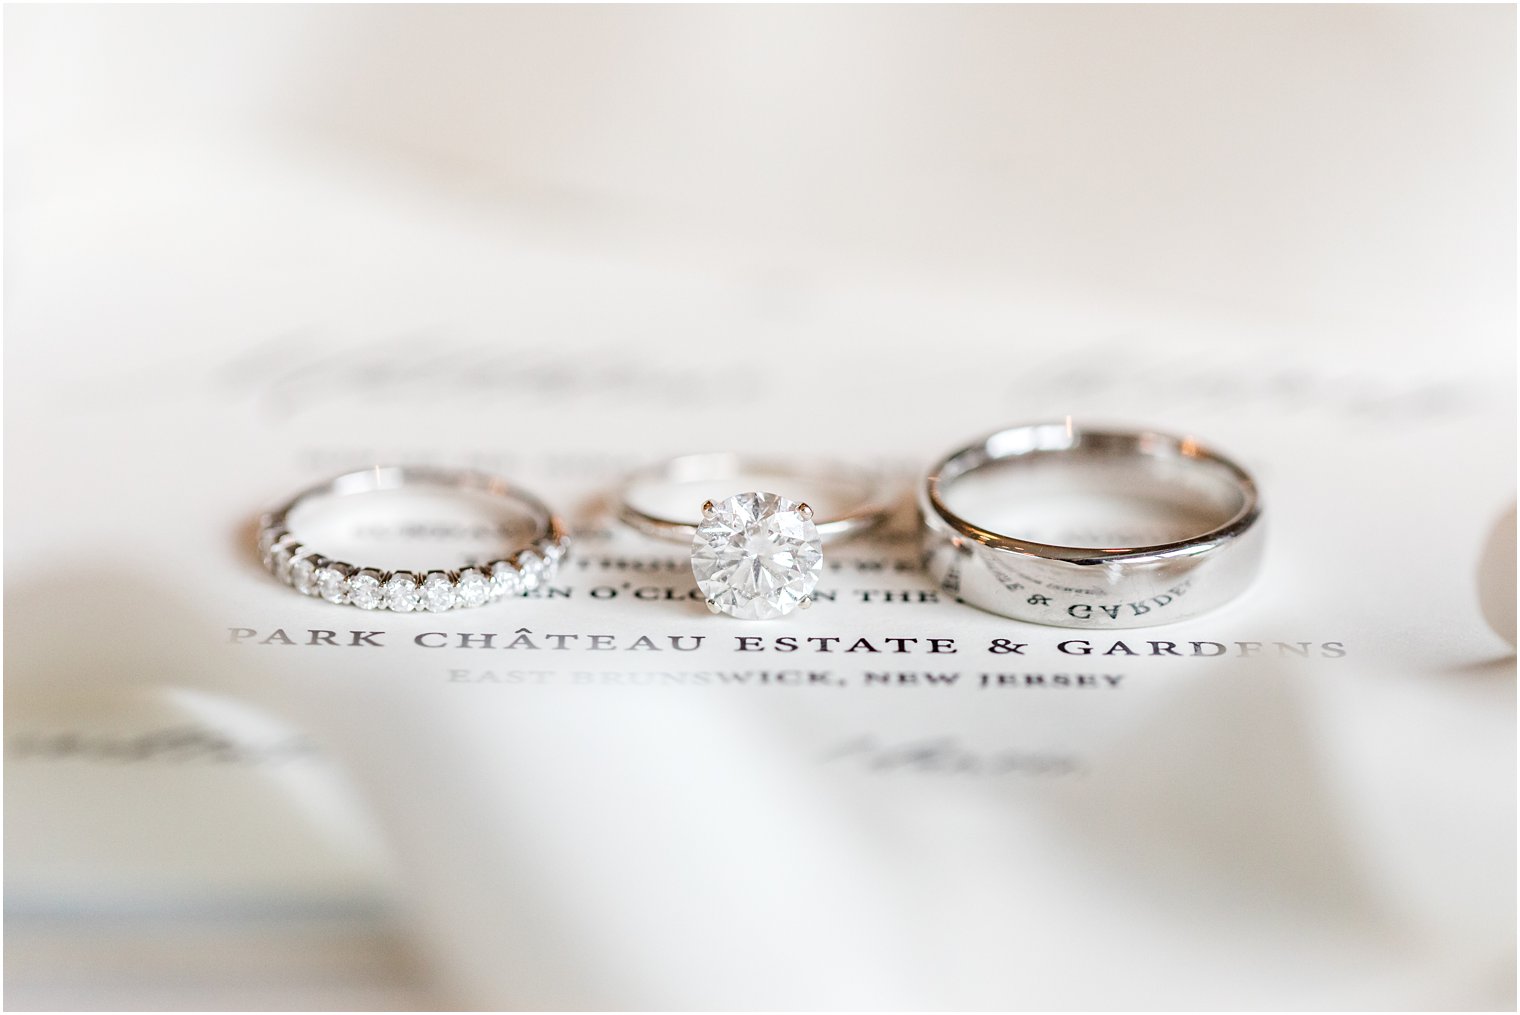 wedding bands lay on wedding invitation at Park Chateau Estate